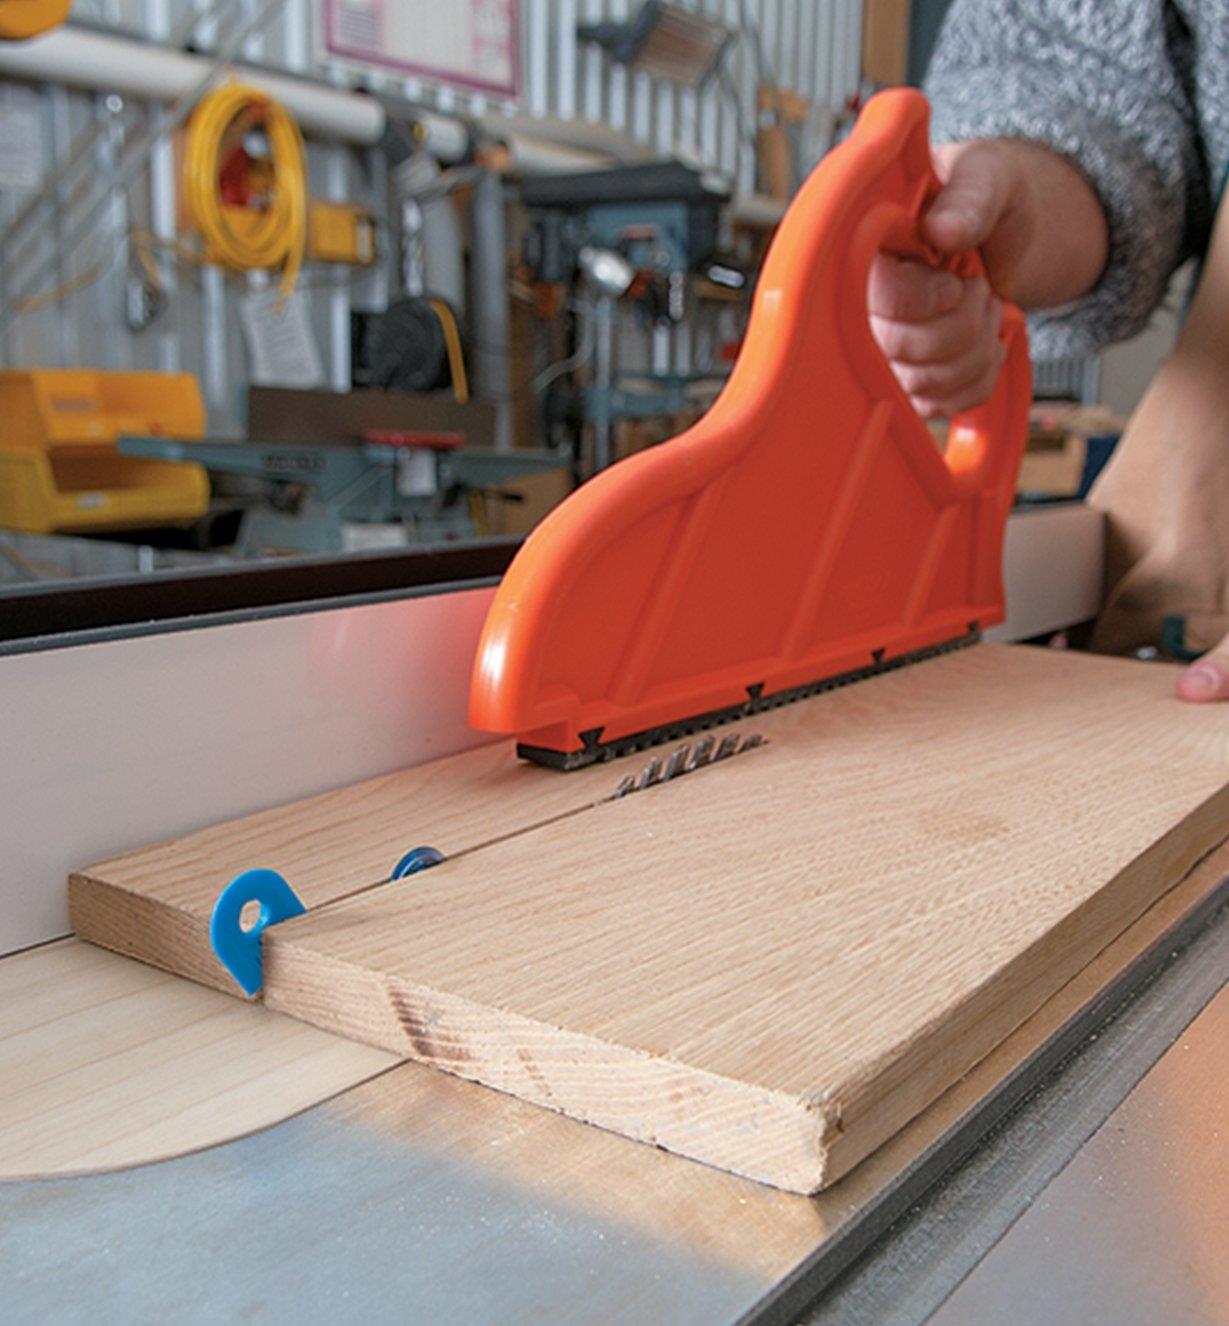 Cutting solid wood on a table saw with the kerf keeper slanted out of position